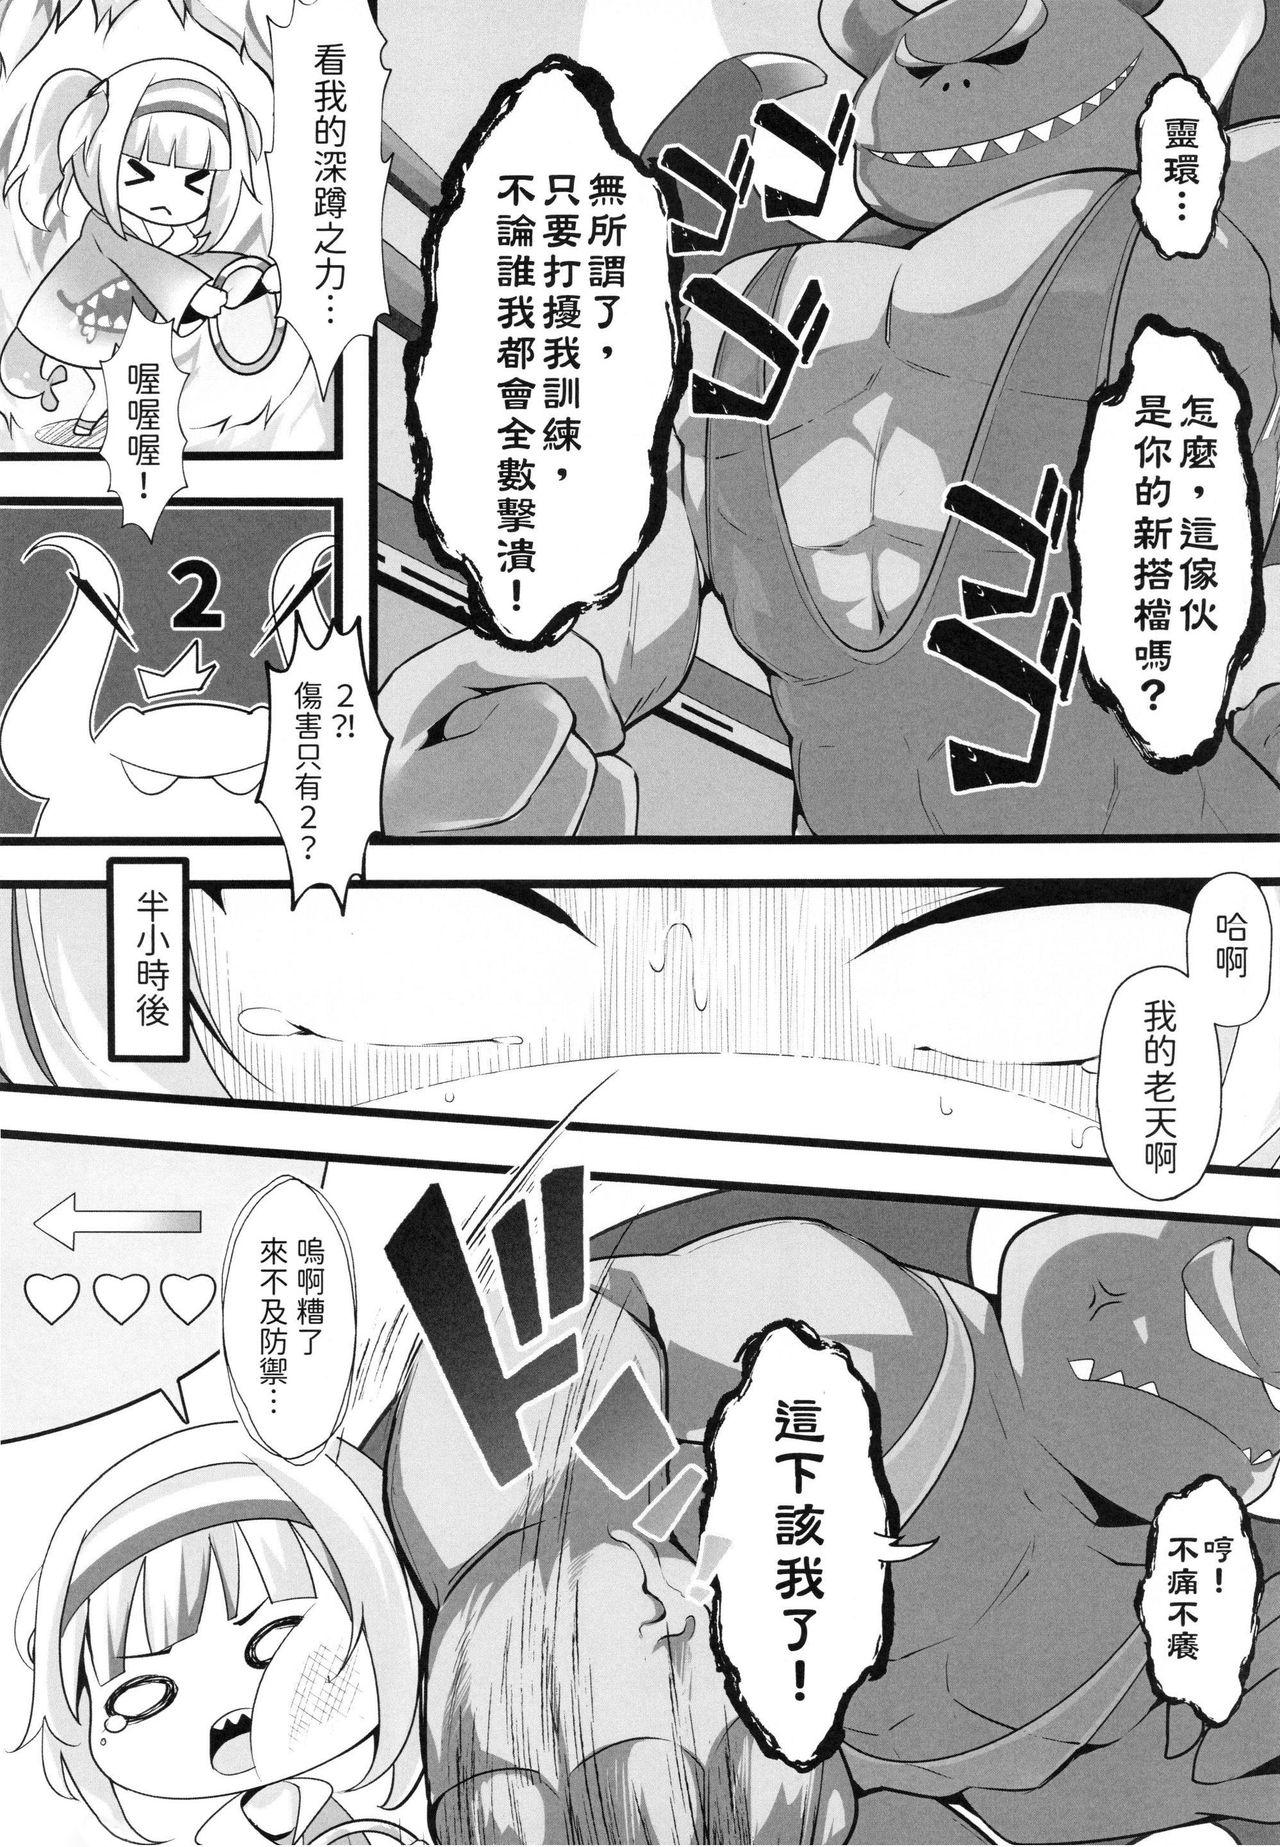 Gay Interracial 【台灣FF37】[ちやみ] Let's Sweat (hololive) (Gawr Gura) (Vtuber) [Chinese] [Decensored] - Hololive Ring fit adventure Teamskeet - Page 5